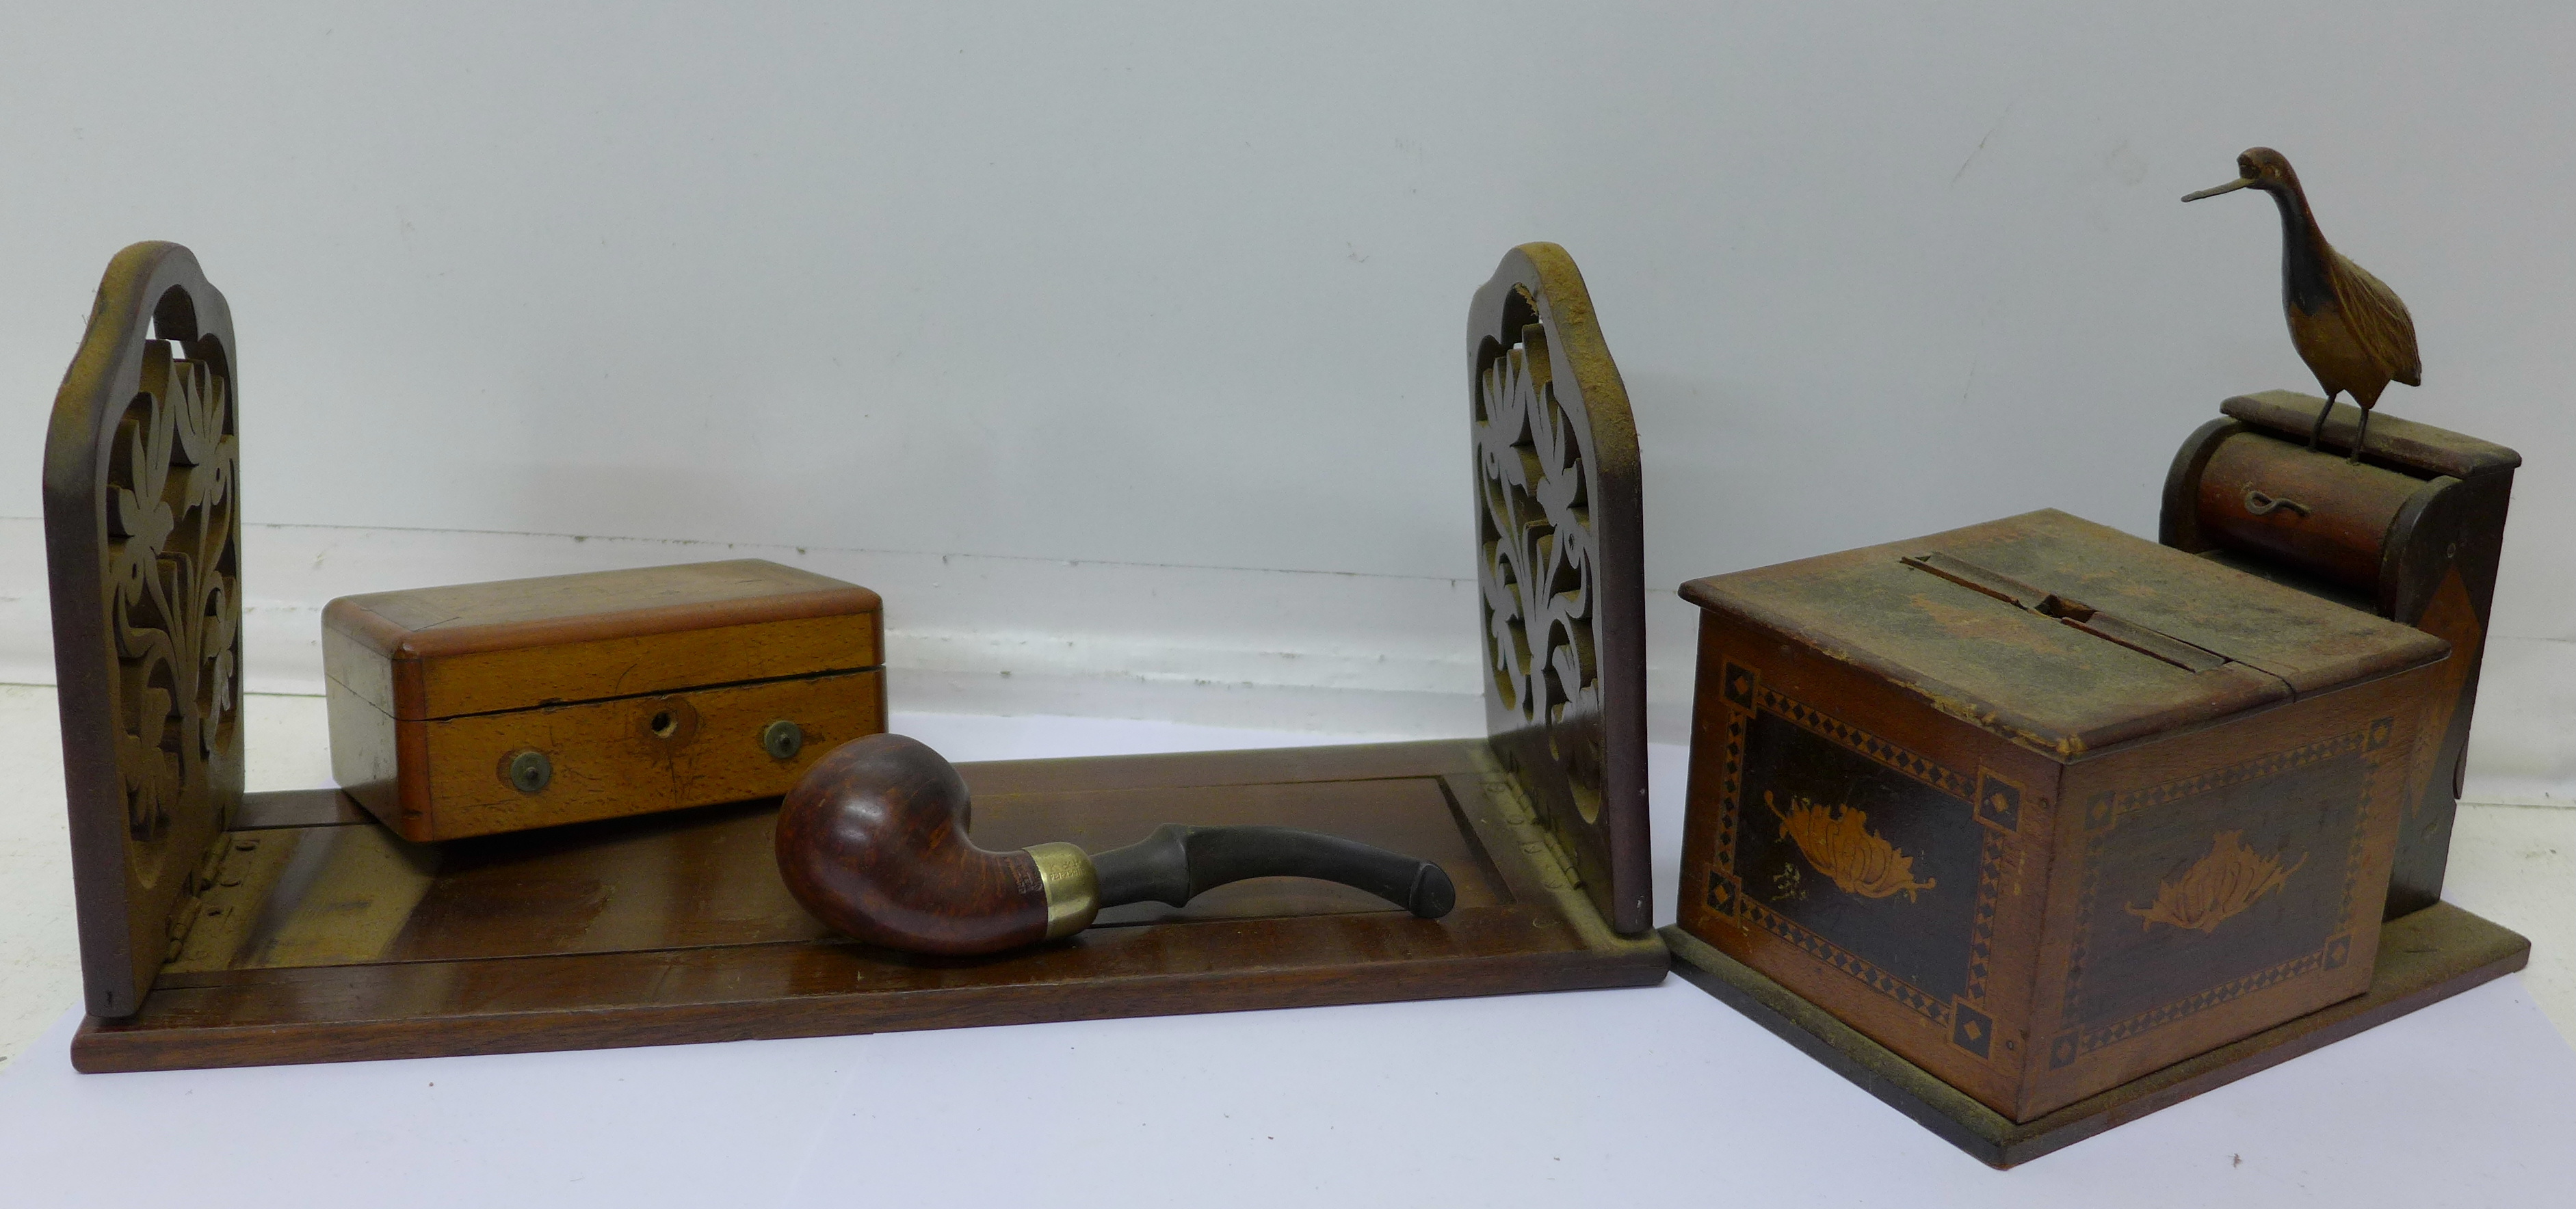 A novelty cigarette dispenser, an inlaid box with musical movement and key,